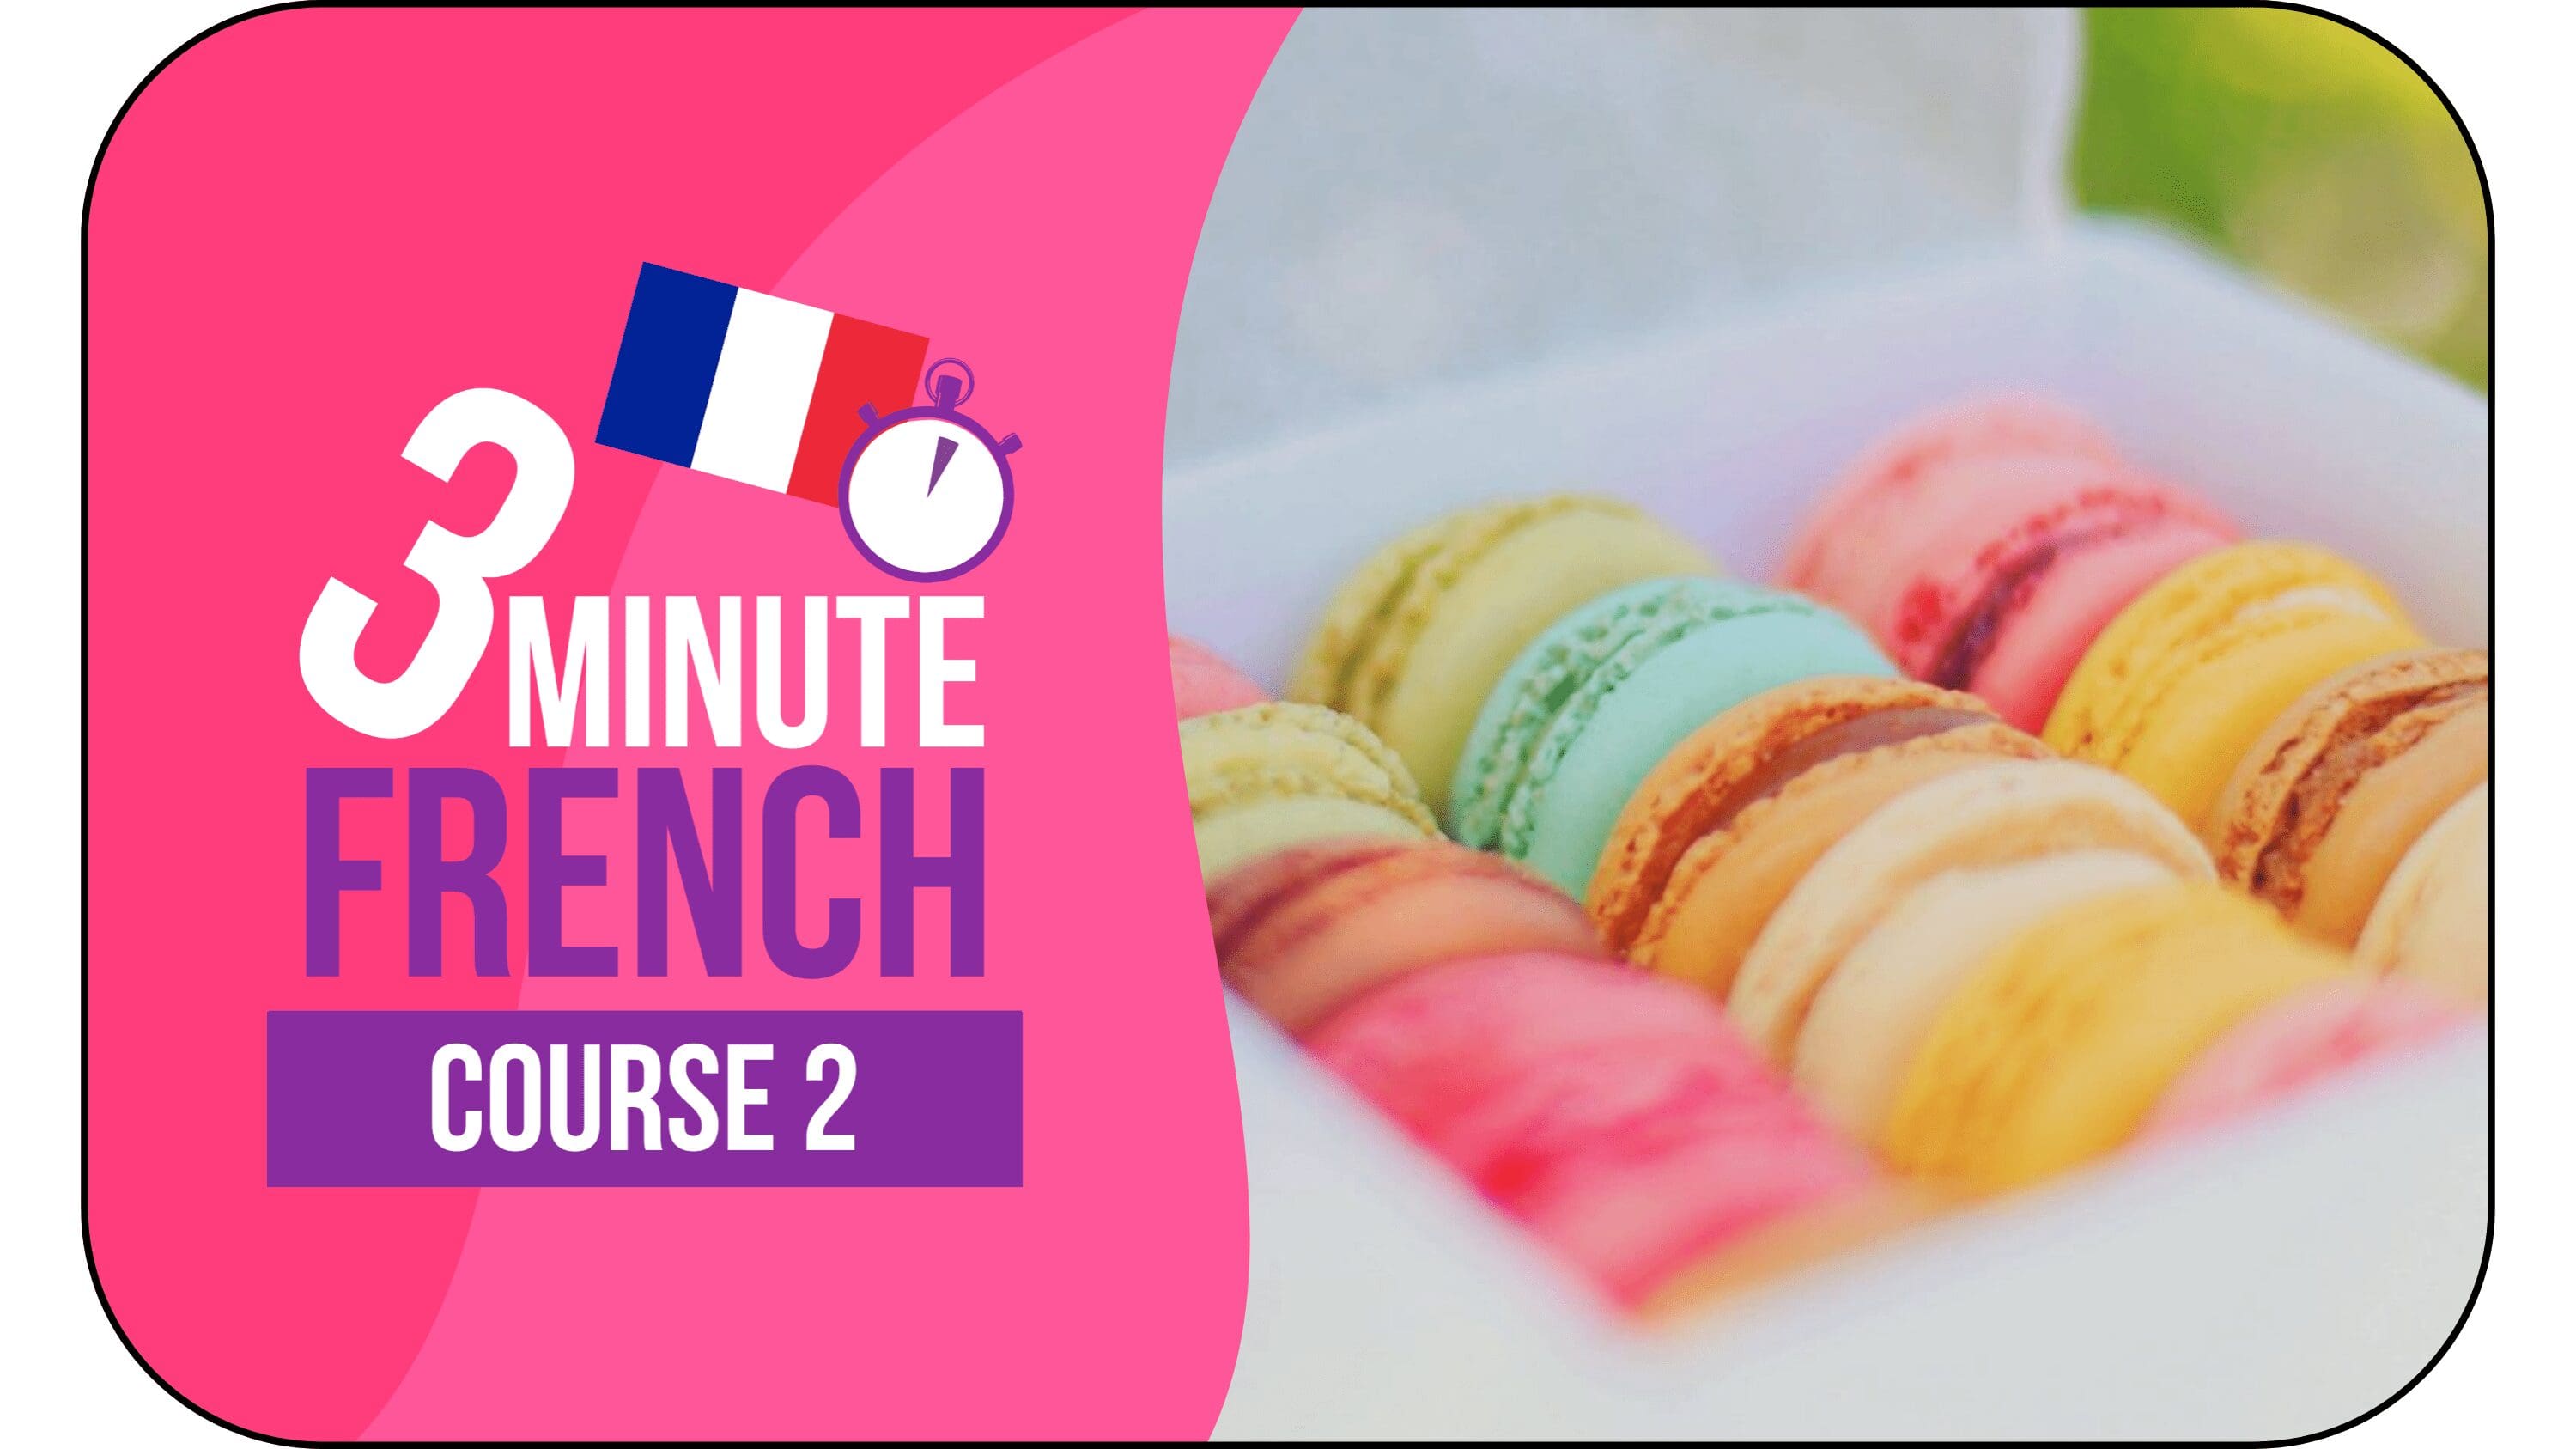 3 Minute French - Course 2